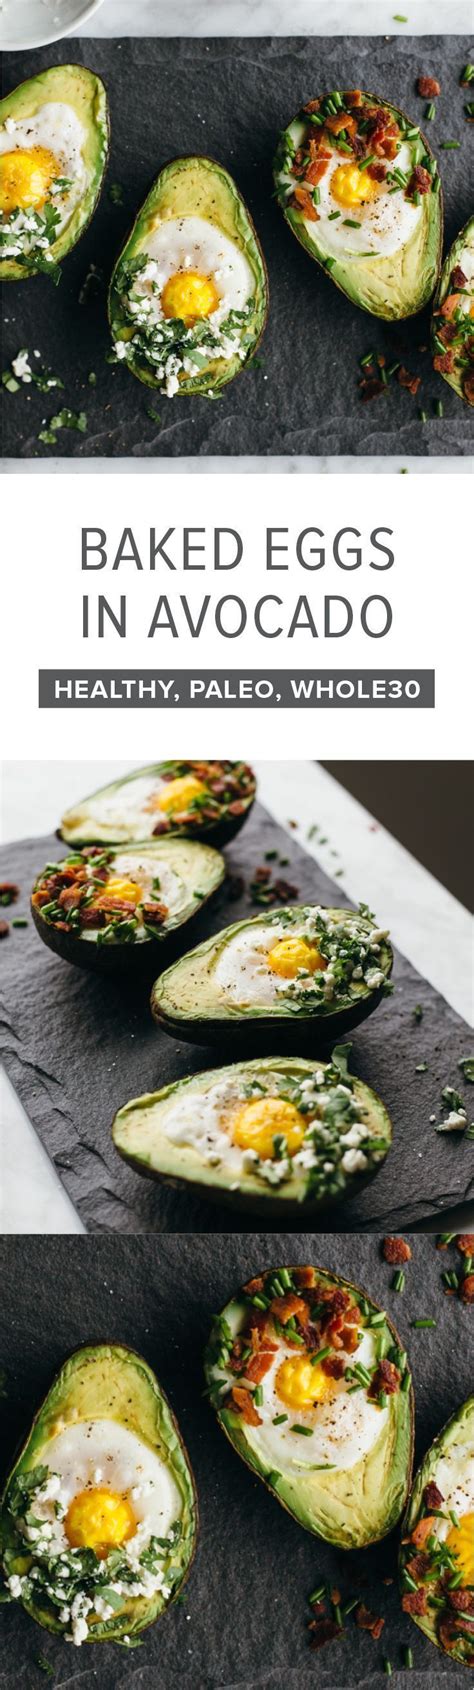 These Baked Eggs In Avocado Are The Perfect Healthy Gluten Free Paleo